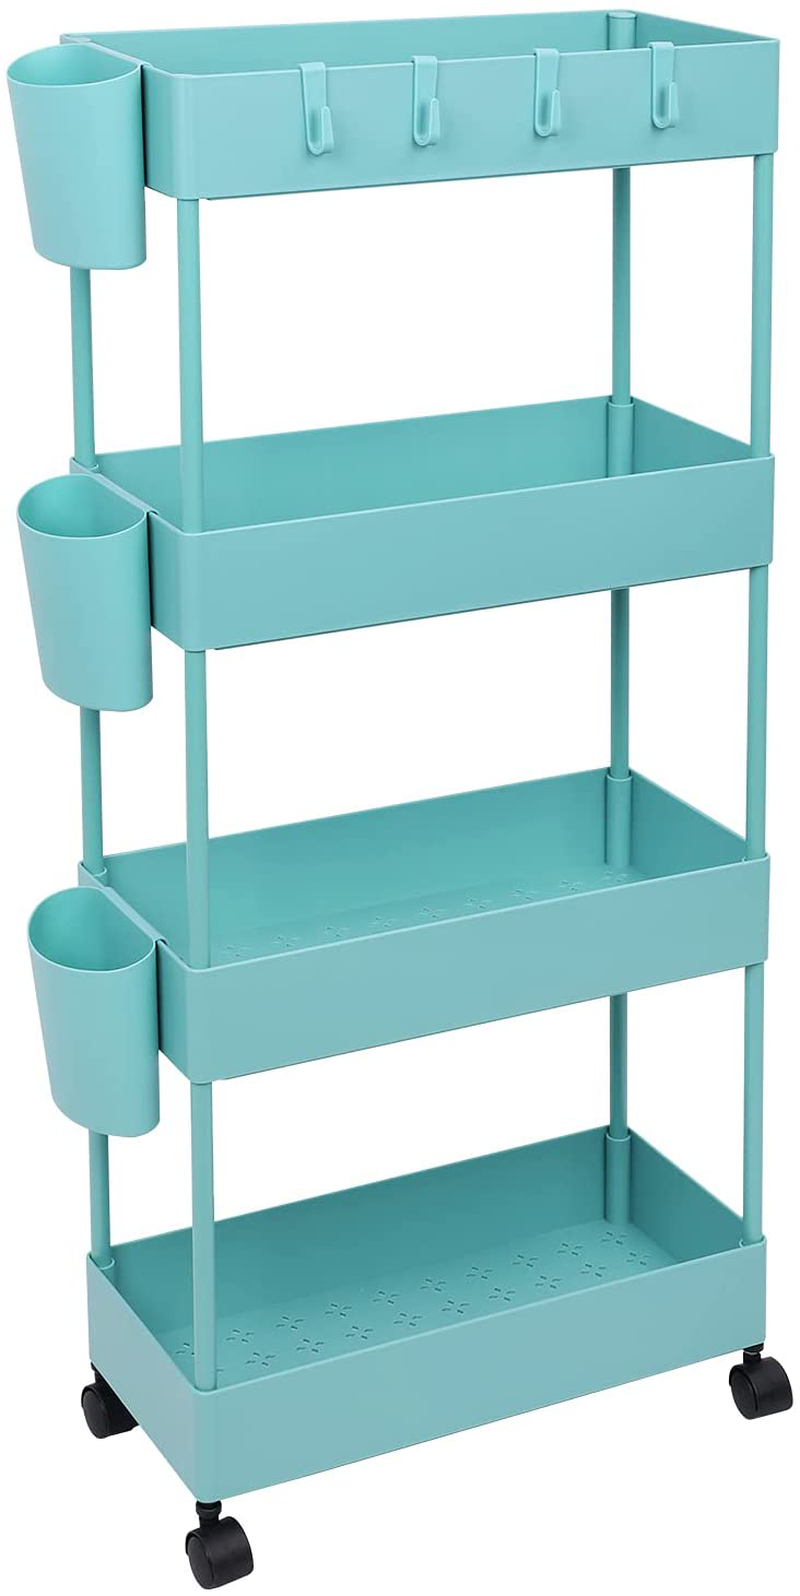 OVAKIA 4-Tier Slim Rolling Utility Cart Storage Shelves Trolley Storage Organizer Shelving Rack with Mesh Baskets / Wheel Casters for Laundry Pantry Bathroom Kitchen Office Narrow Places(Teal) Home & Garden > Kitchen & Dining > Food Storage LIVECOMFY Teal  